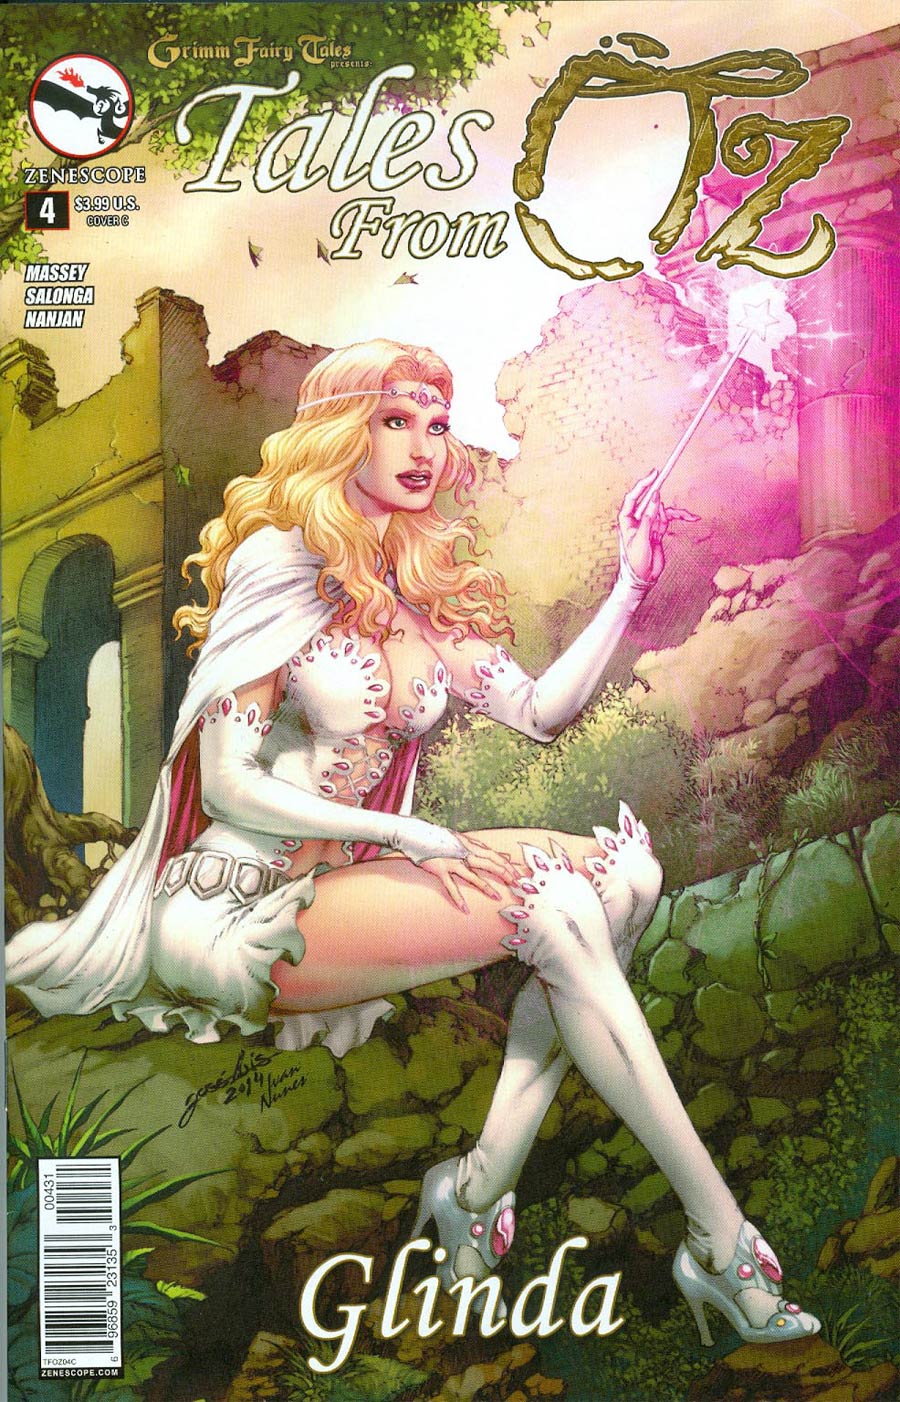 Grimm Fairy Tales Presents Tales From Oz #4 Glinda Cover C Jose Luis